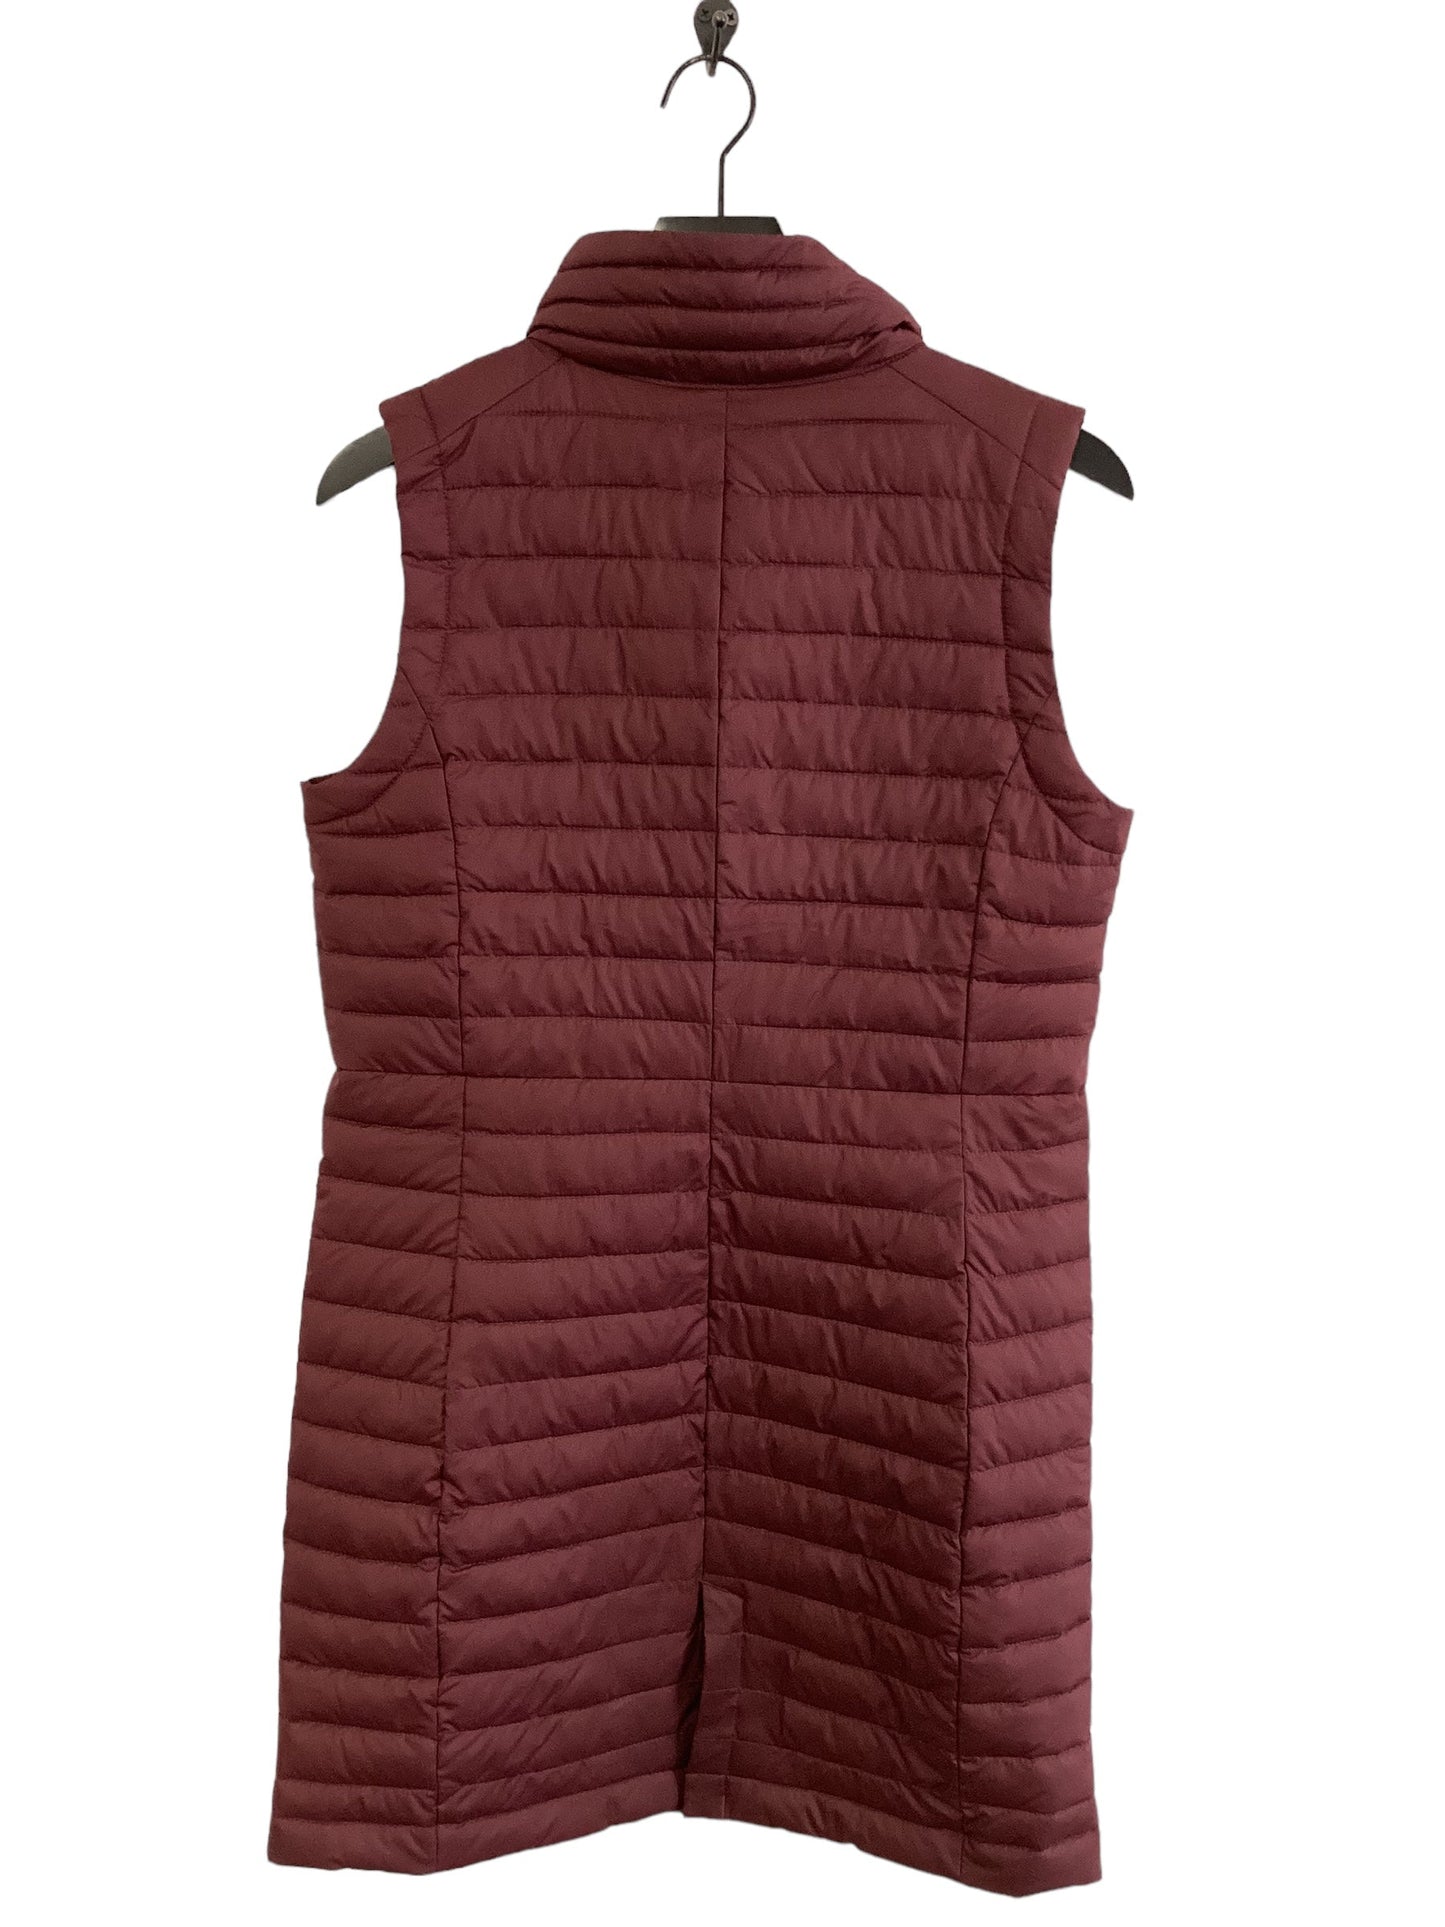 Vest Puffer & Quilted By Columbia  Size: M